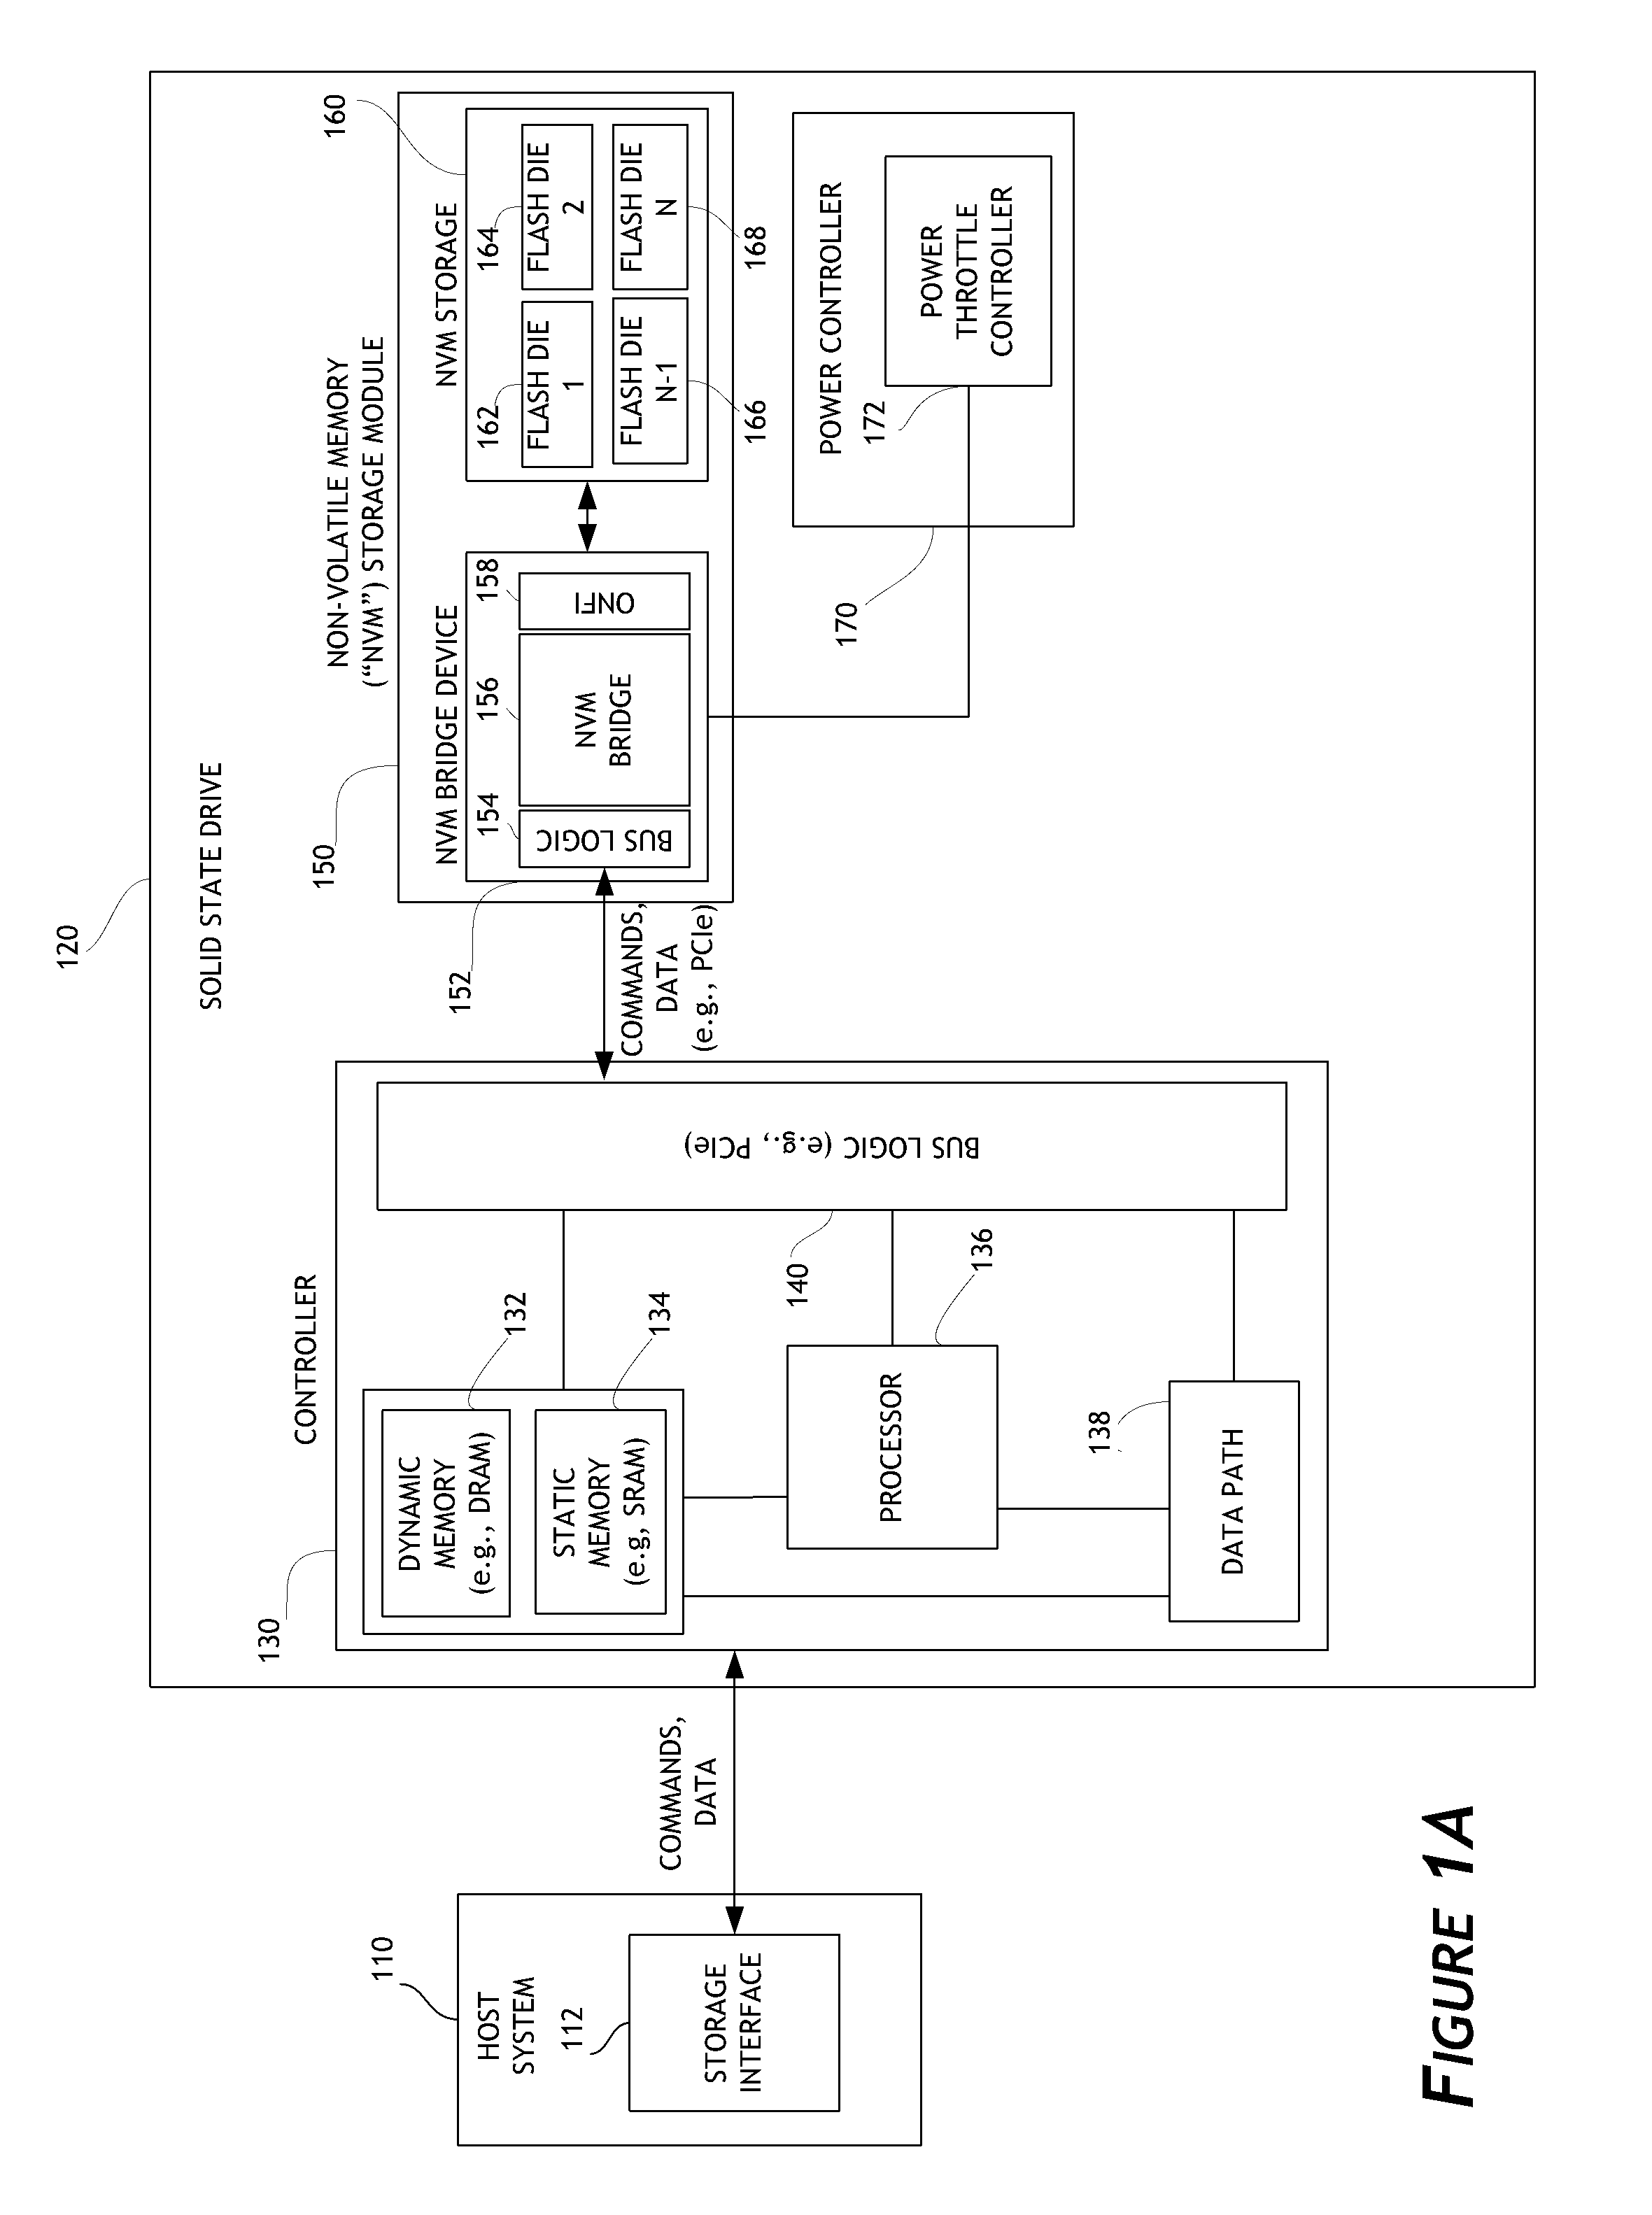 Systems and methods for error injection in data storage systems